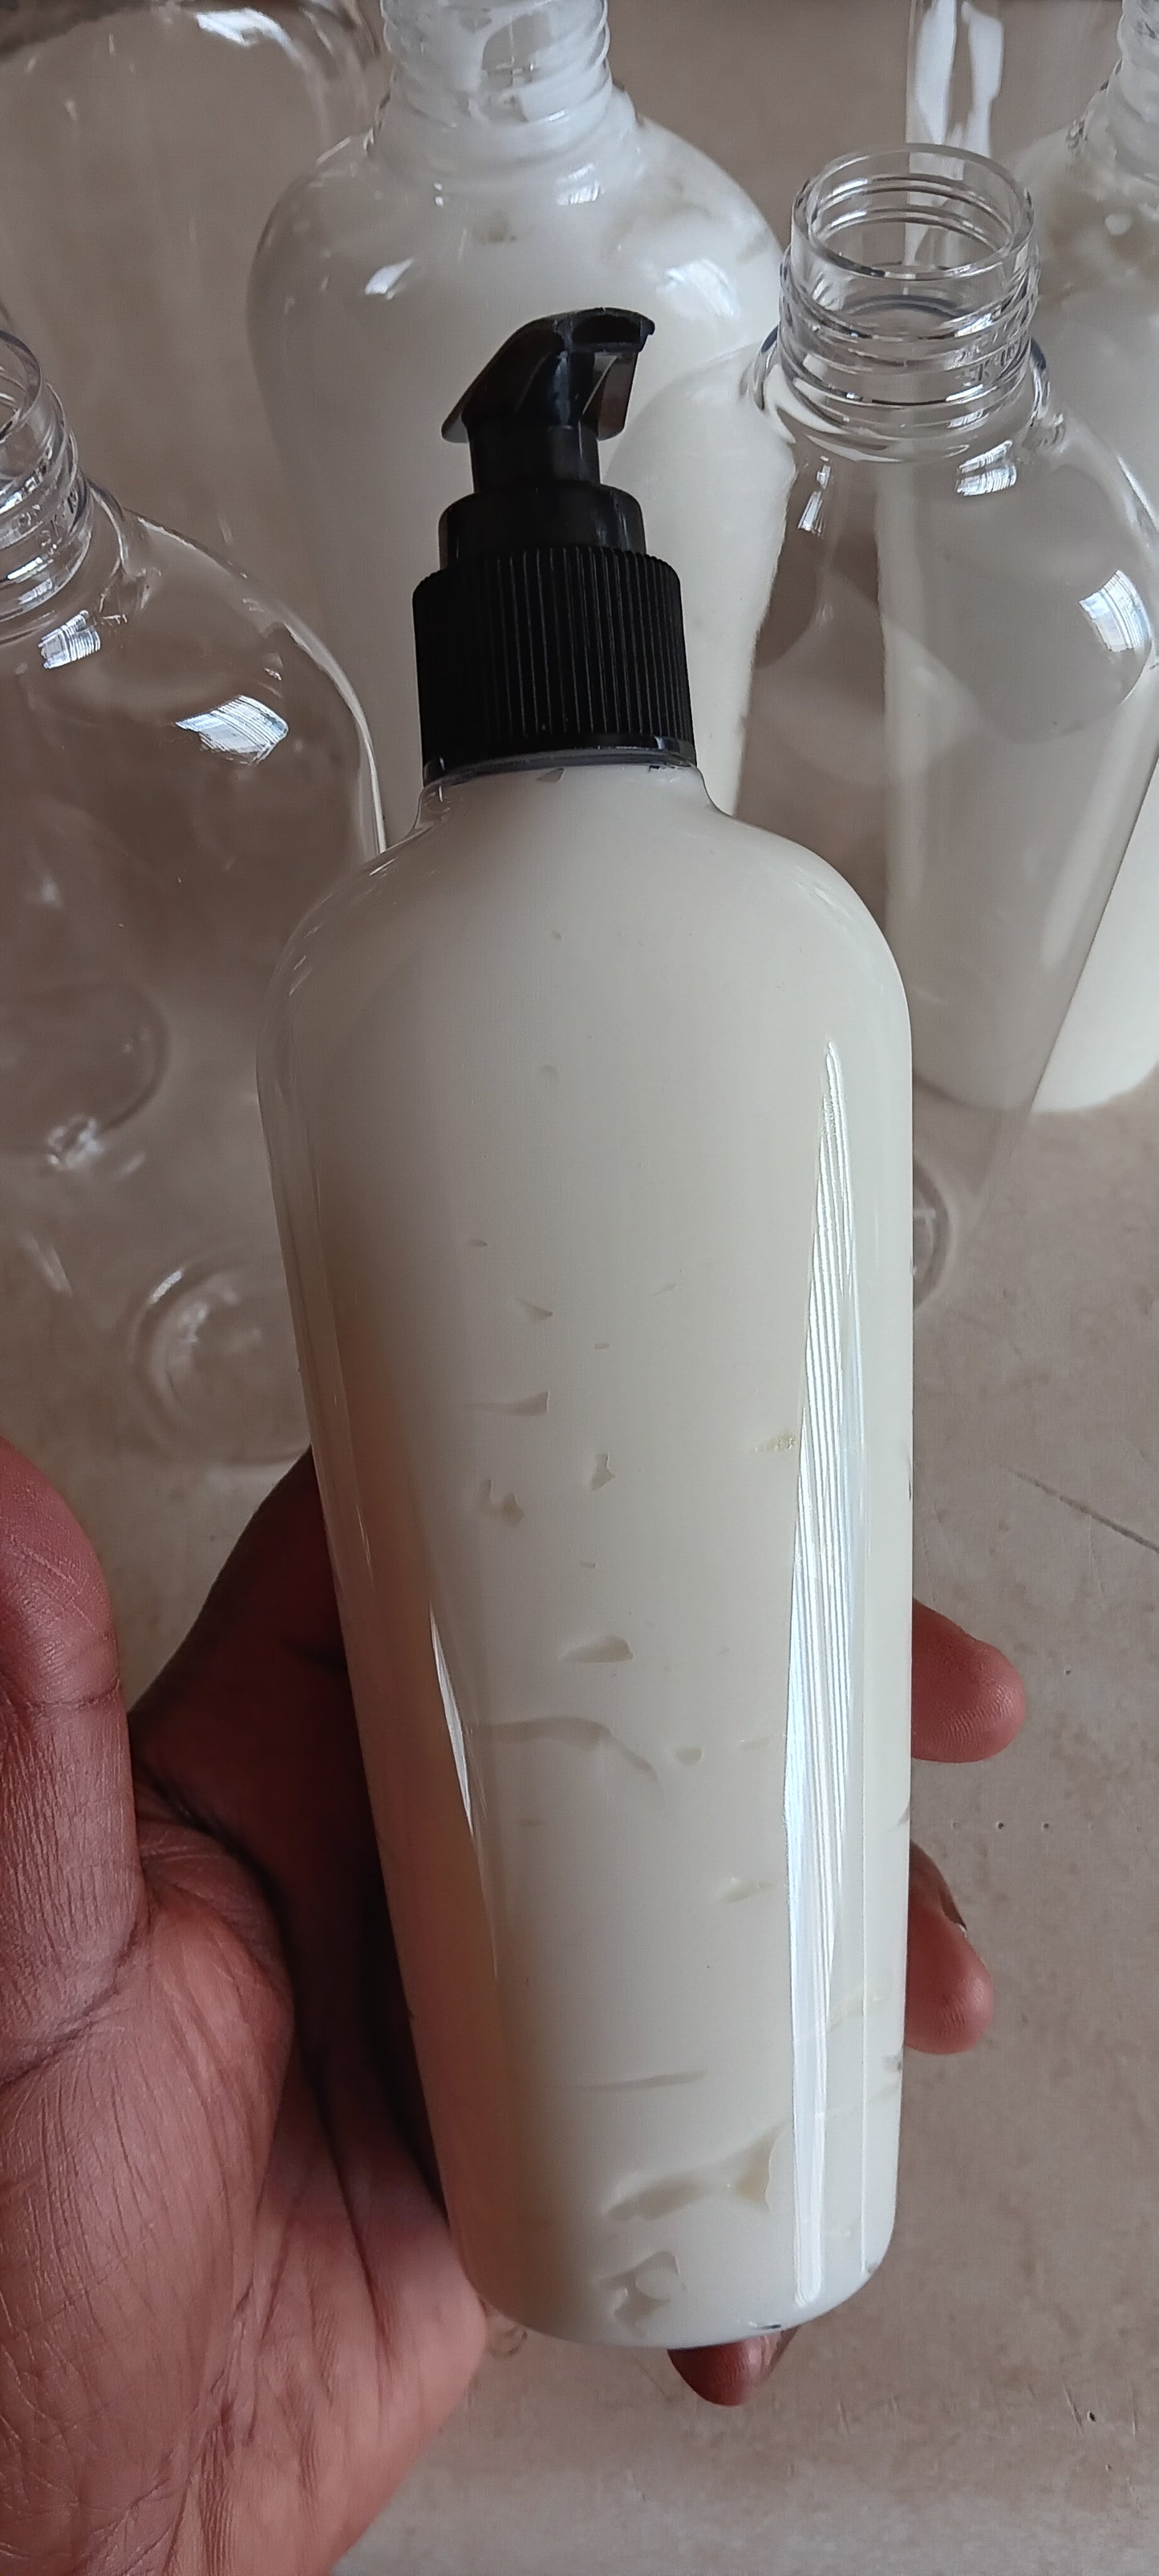 CALM DOWN Butter Cream Body Lotion! Vanilla Lavender Oatmeal soothing Eczema and Extreme dry skin moisturizer. 100% Vegan/ Cruelty Free, 8oz Pump Bottle.